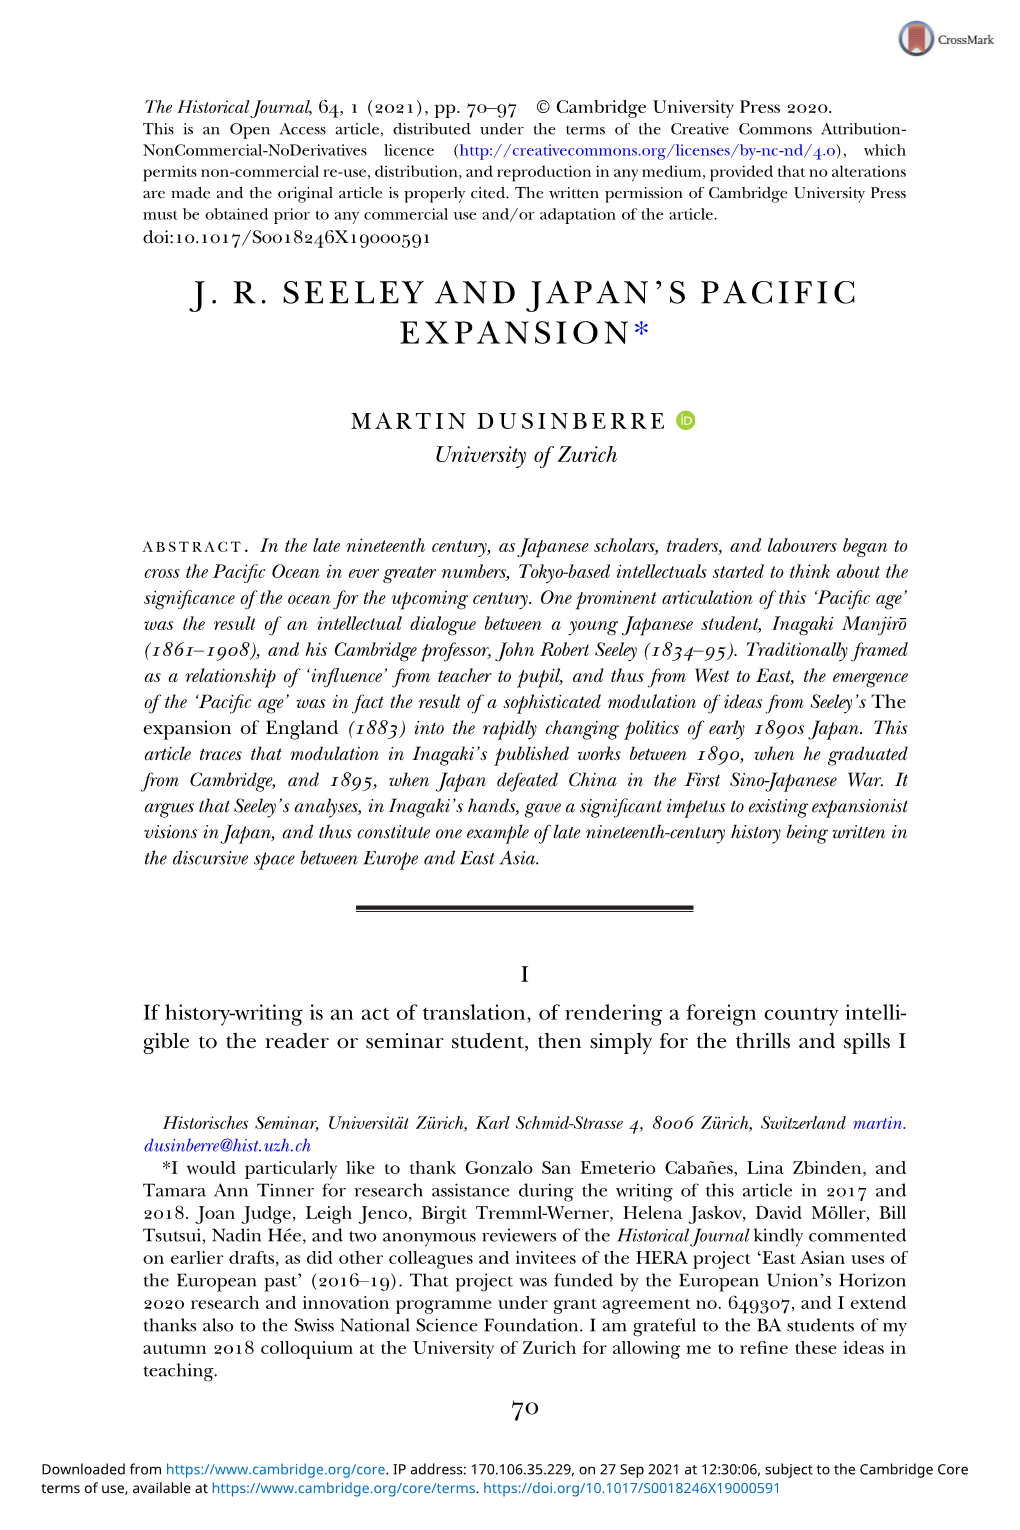 J. R. Seeley and Japan's Pacific Expansion*